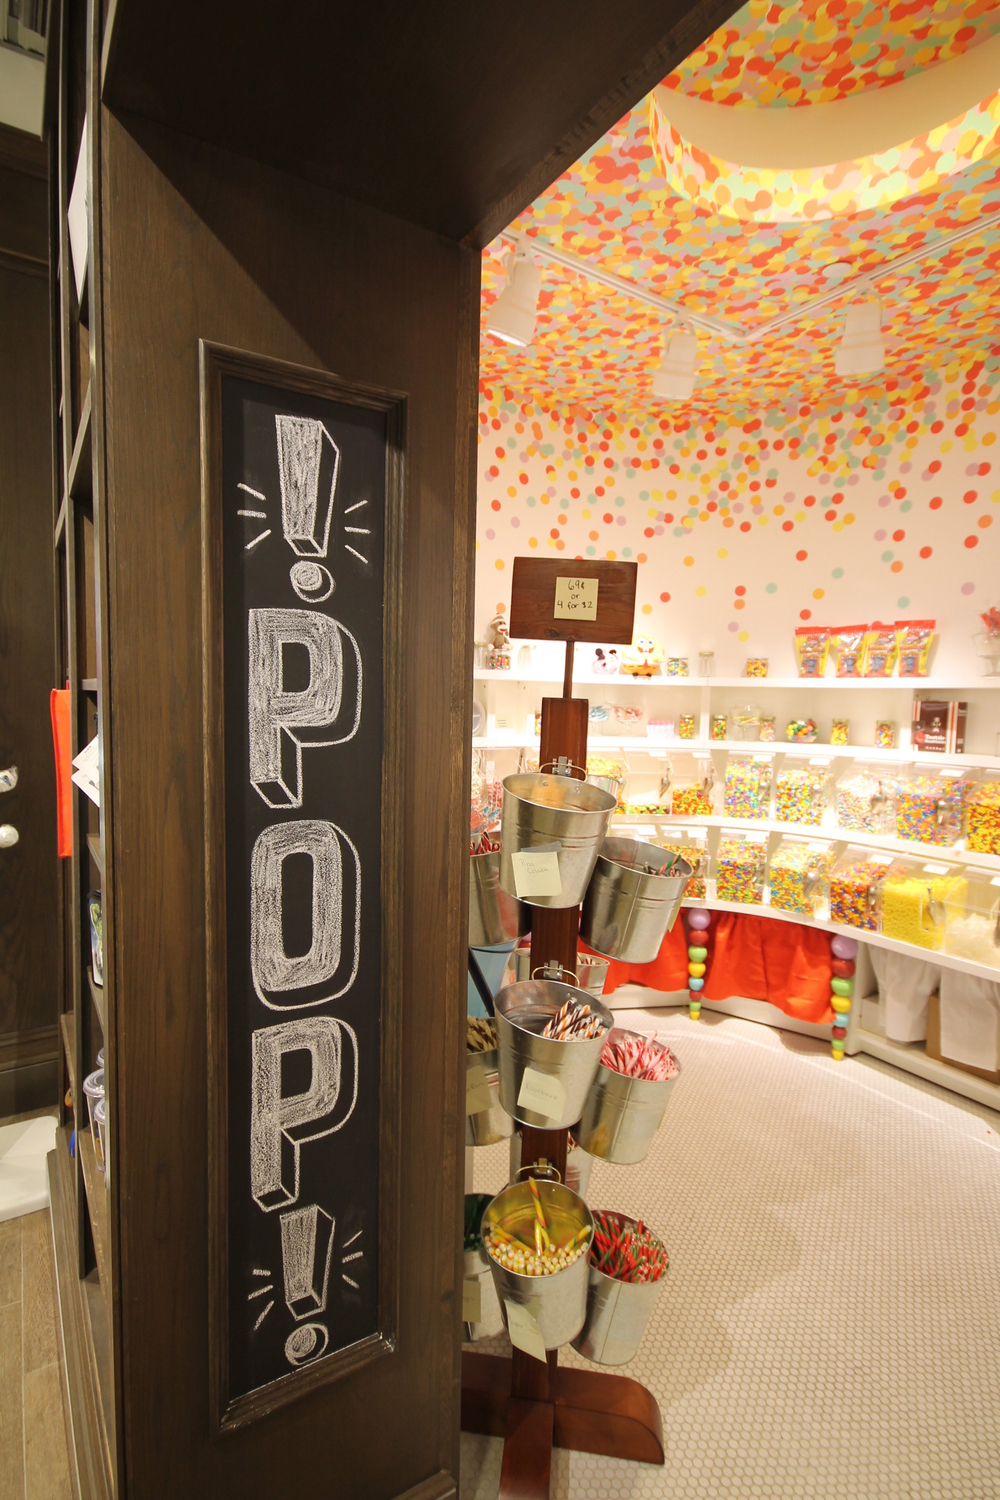 Lolli and Pops, Fashion Outlets of Chicago, Rosemont IL, August 2013